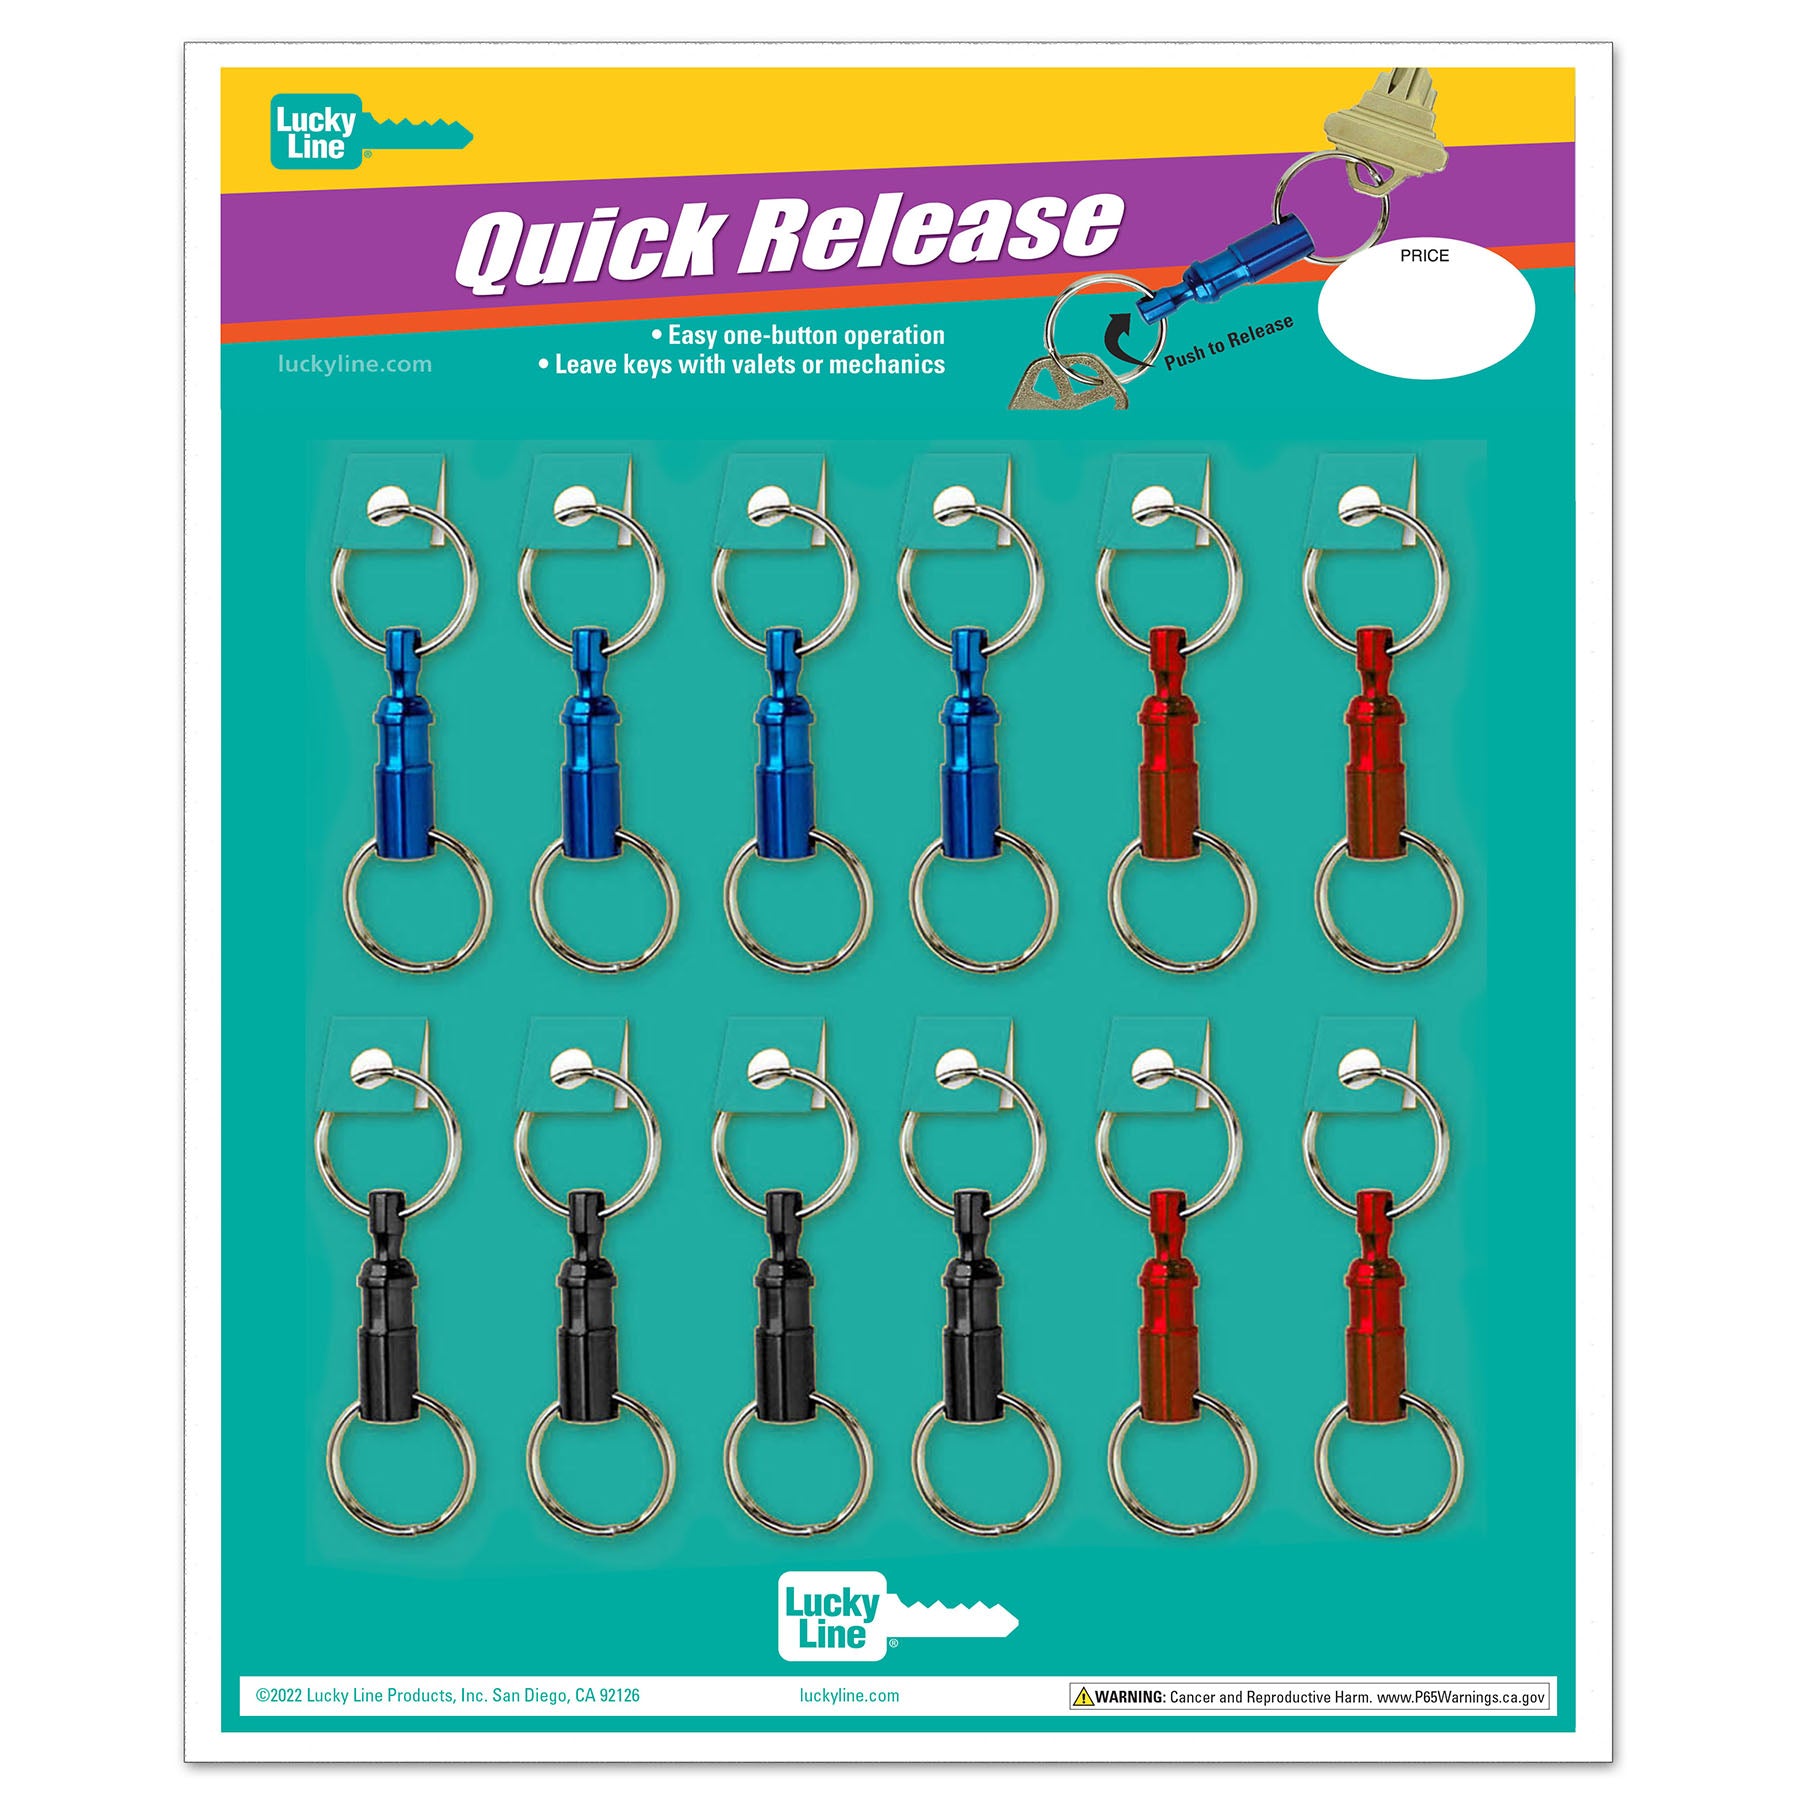 Quick Release, Key Releases